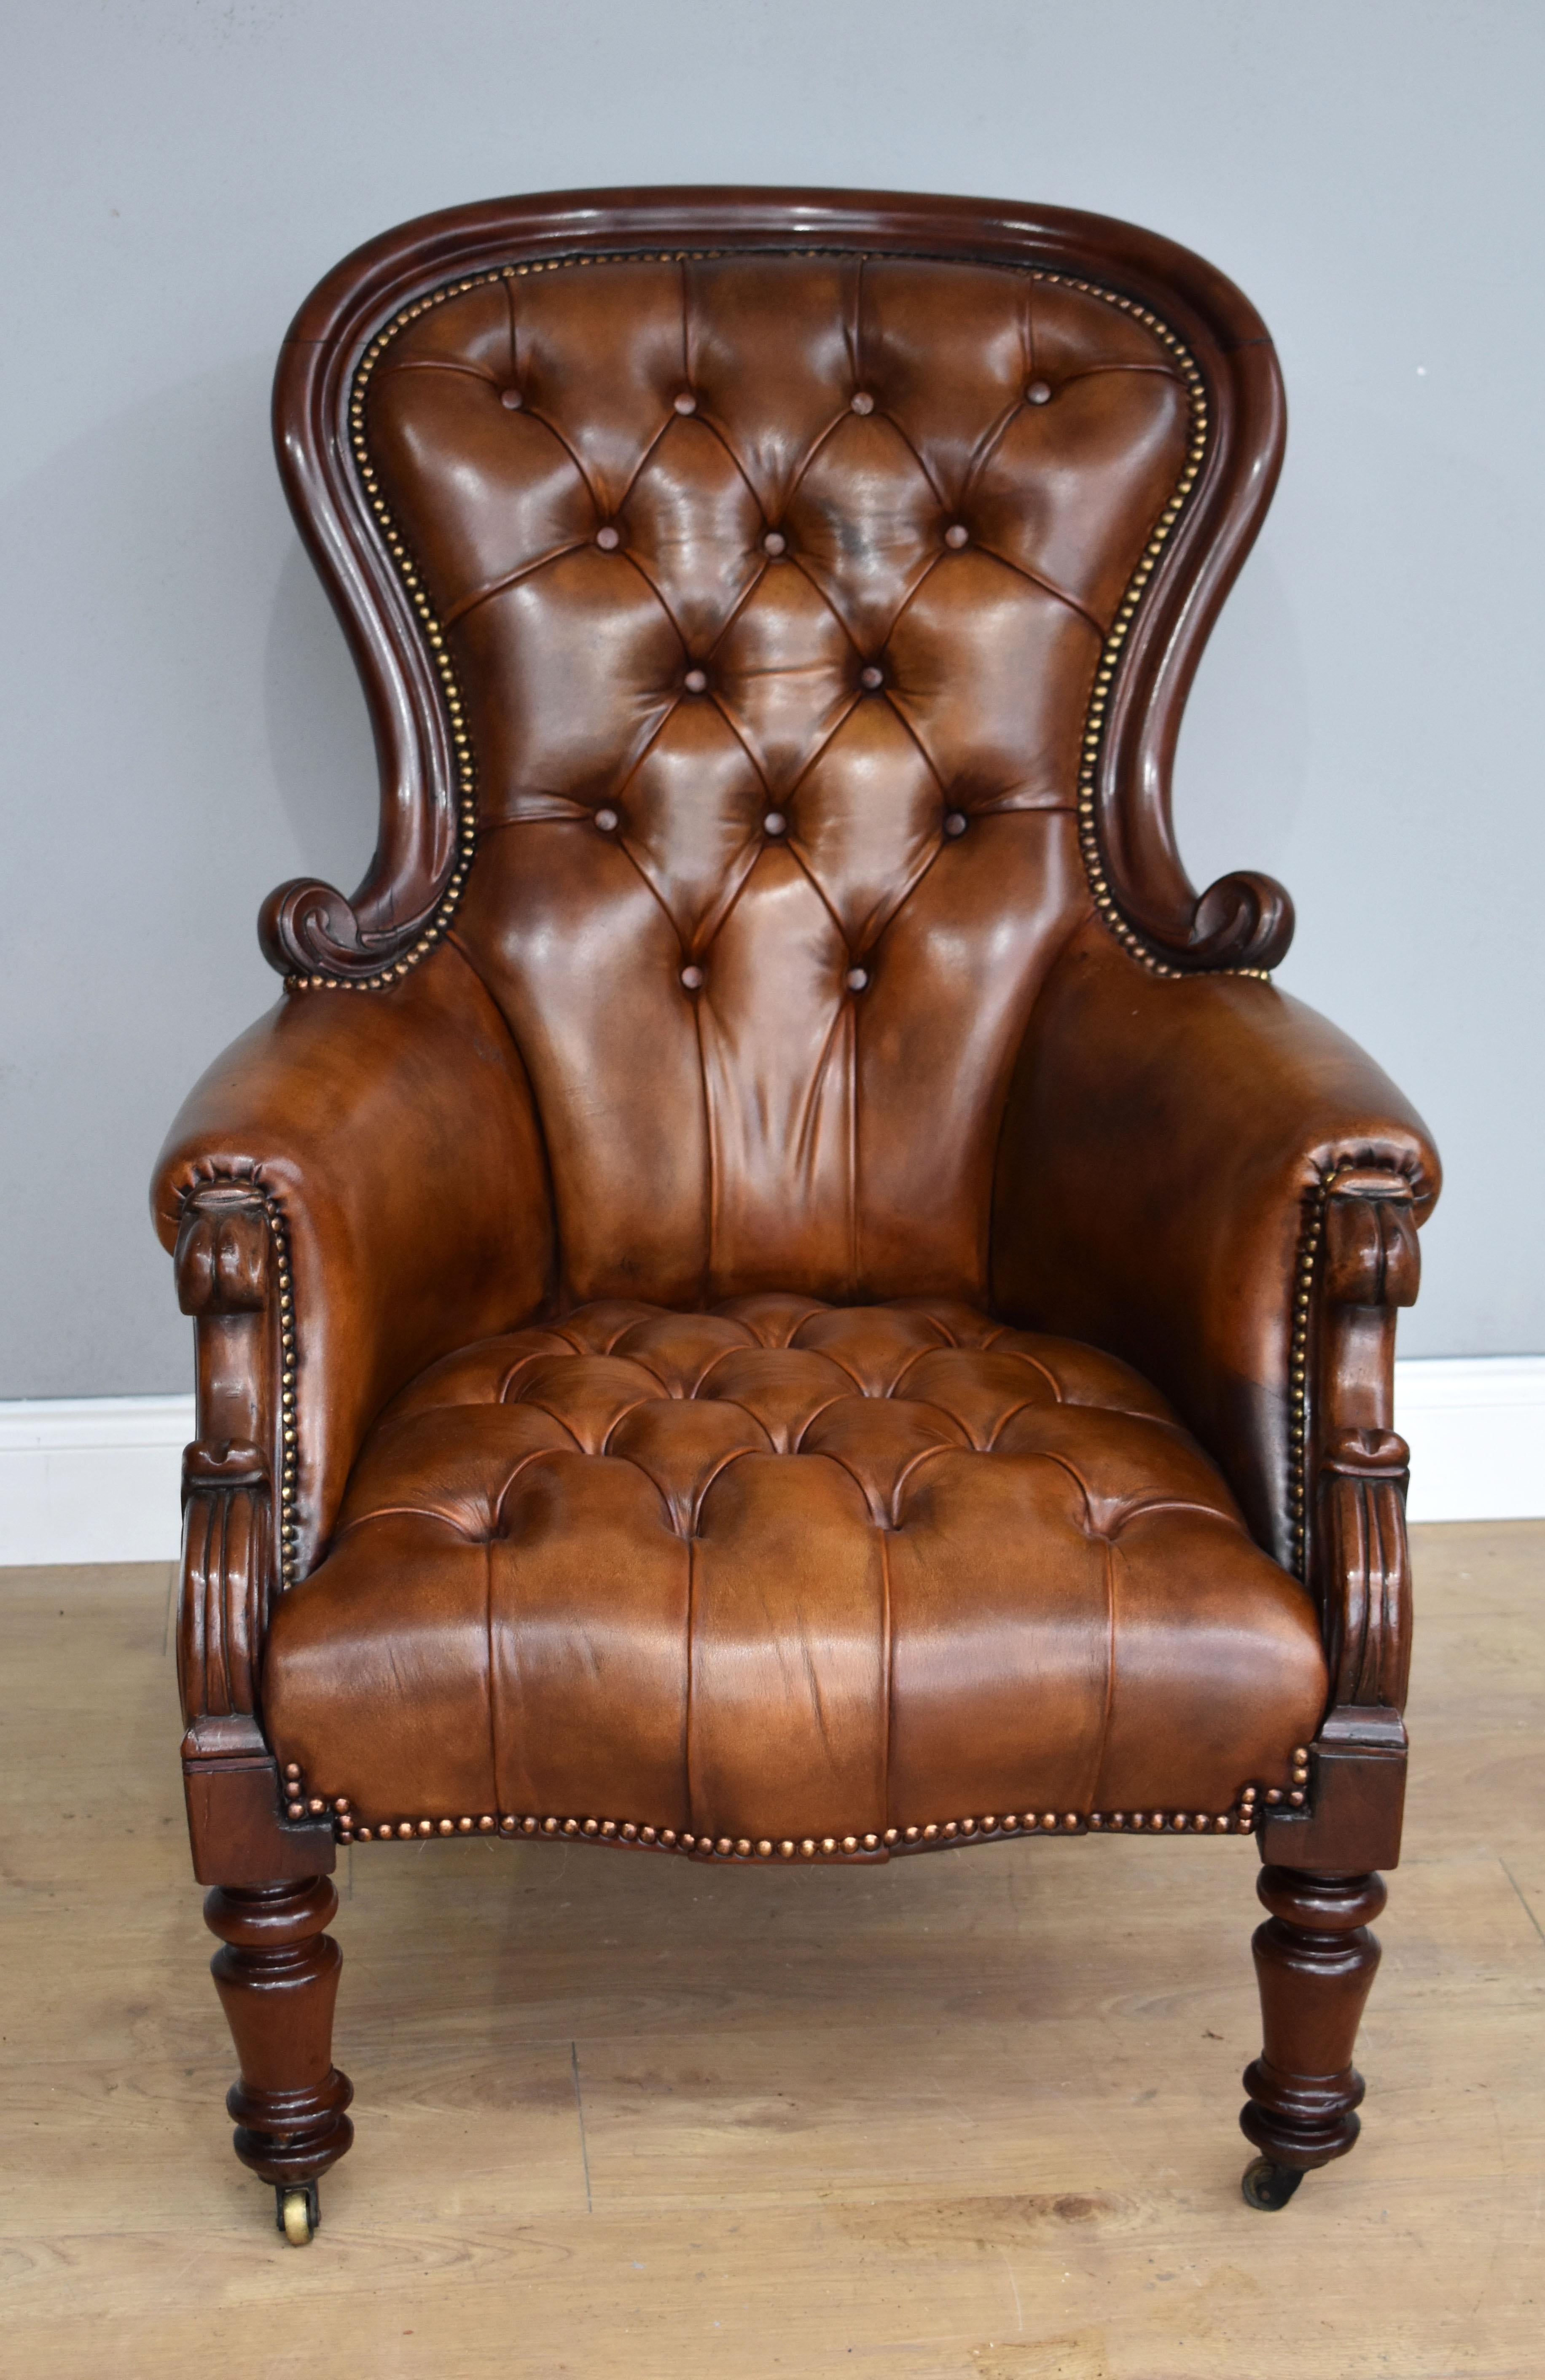 For sale is a good quality Victorian leather armchair, with a 